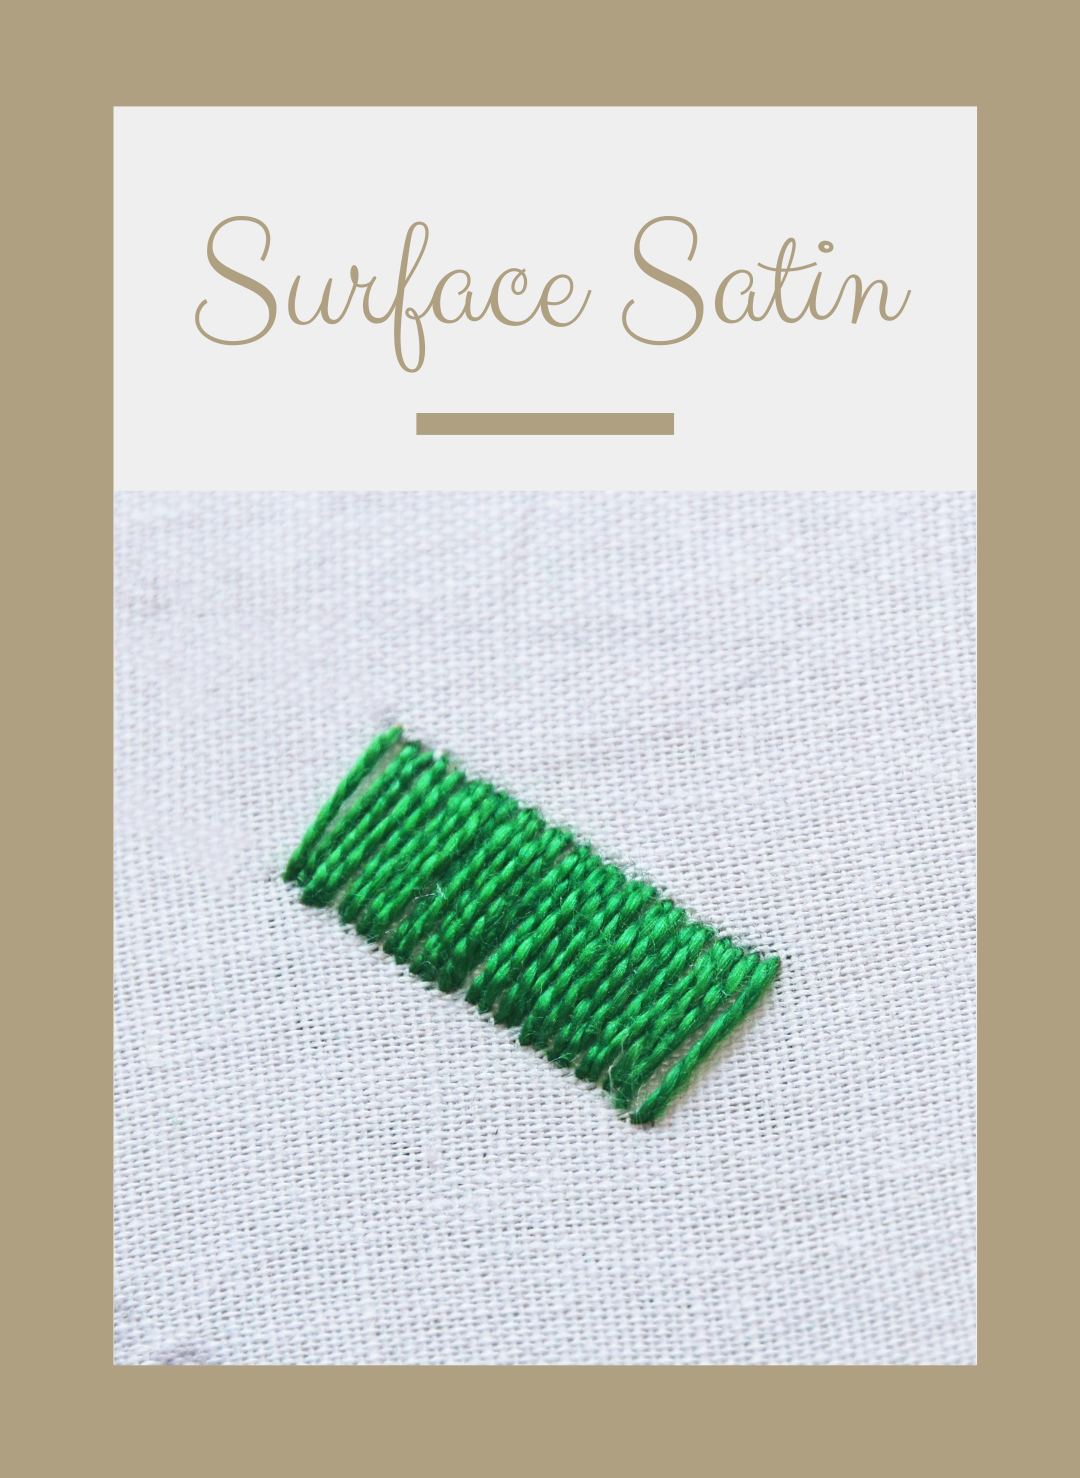 How to do the Surface Satin Stitch - Sarah's Hand Embroidery Tutorials